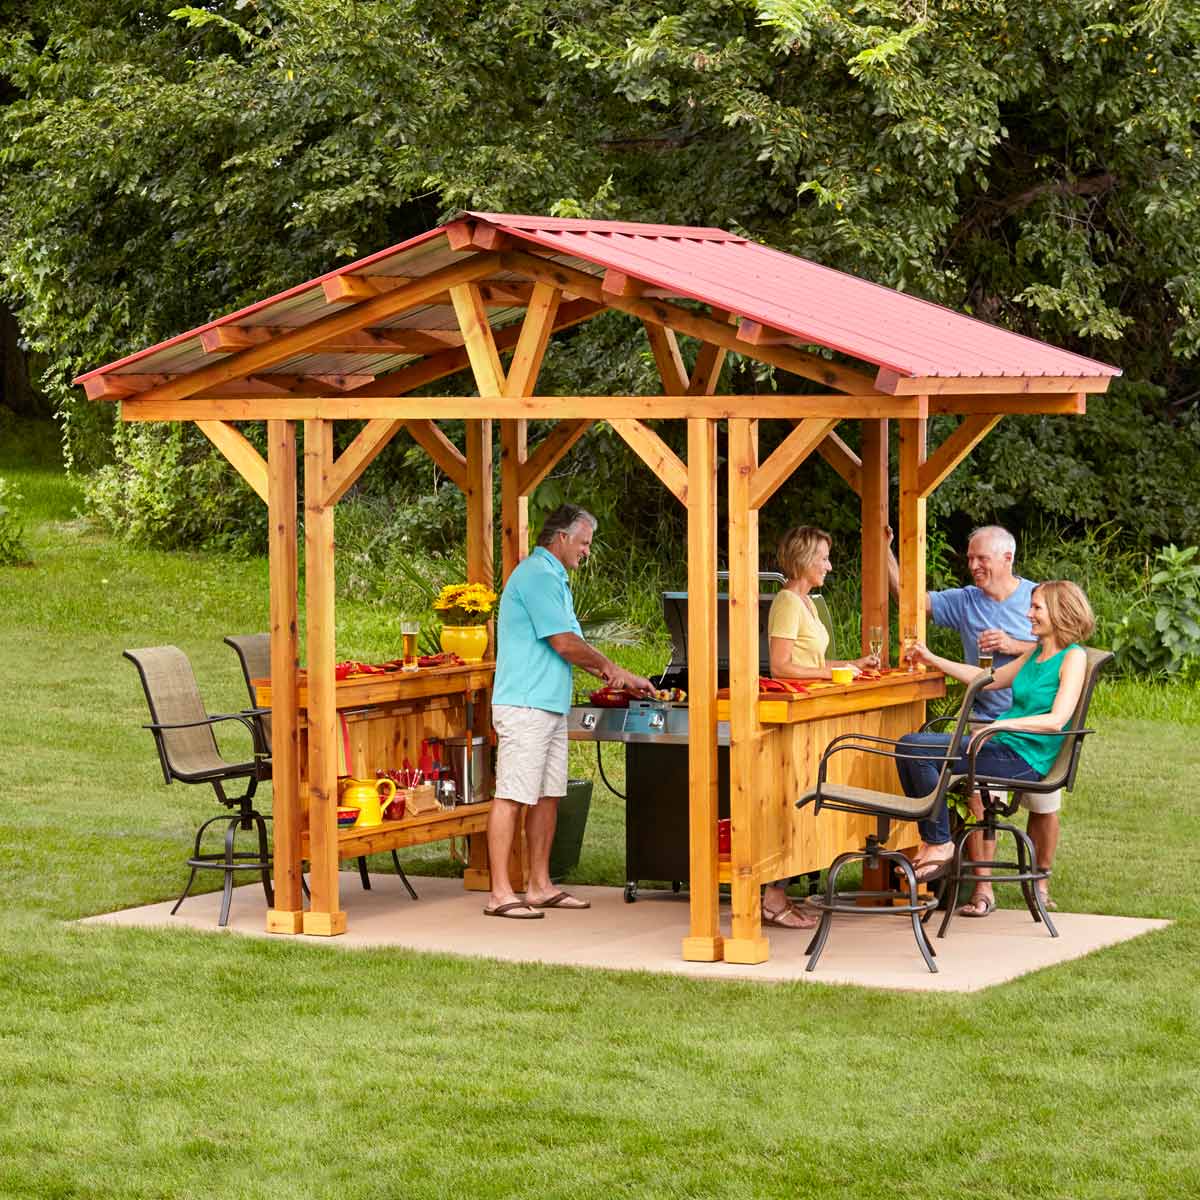 33 Diy Gazebo Plans Learn How To Build A Gazebo With Free Plans Home And Gardening Ideas